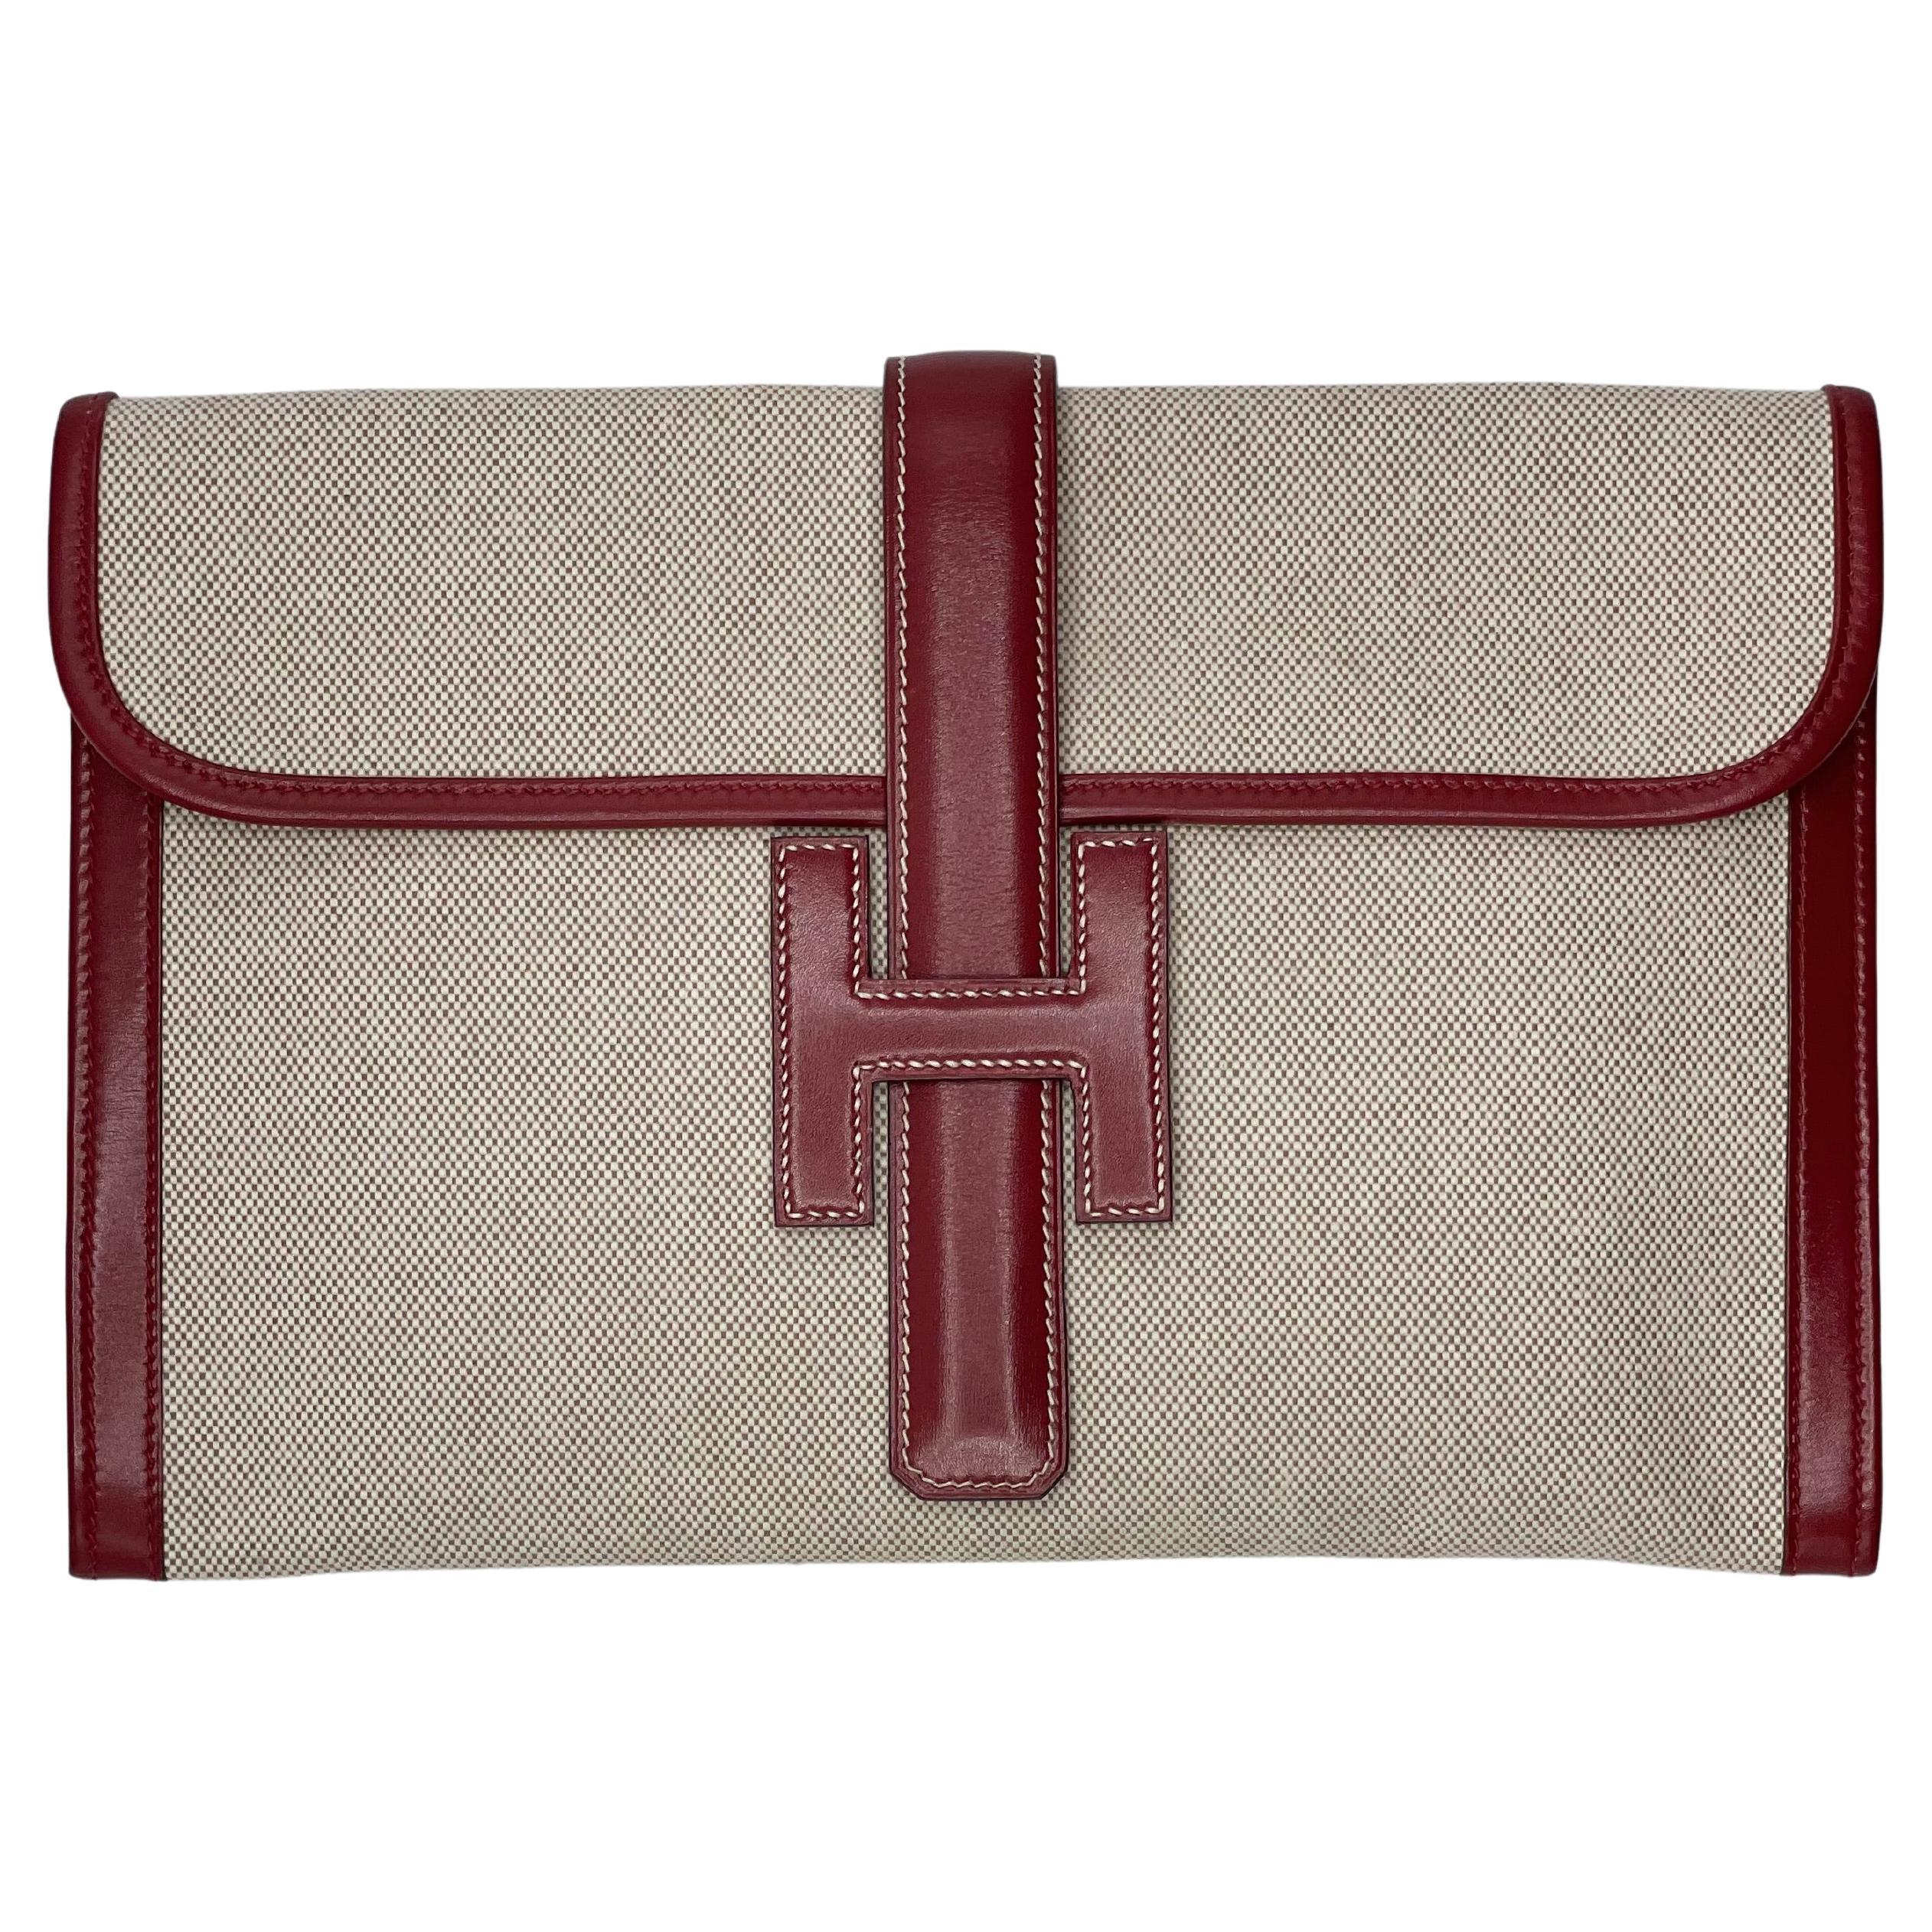 Hermès vintage jige toile leather trim clutch 29. Light beige canvas framed by burgundy leather, with beige stitching on the leather closure. This 1988 clutch has light stains on the inside but is otherwise in good condition. No smell 